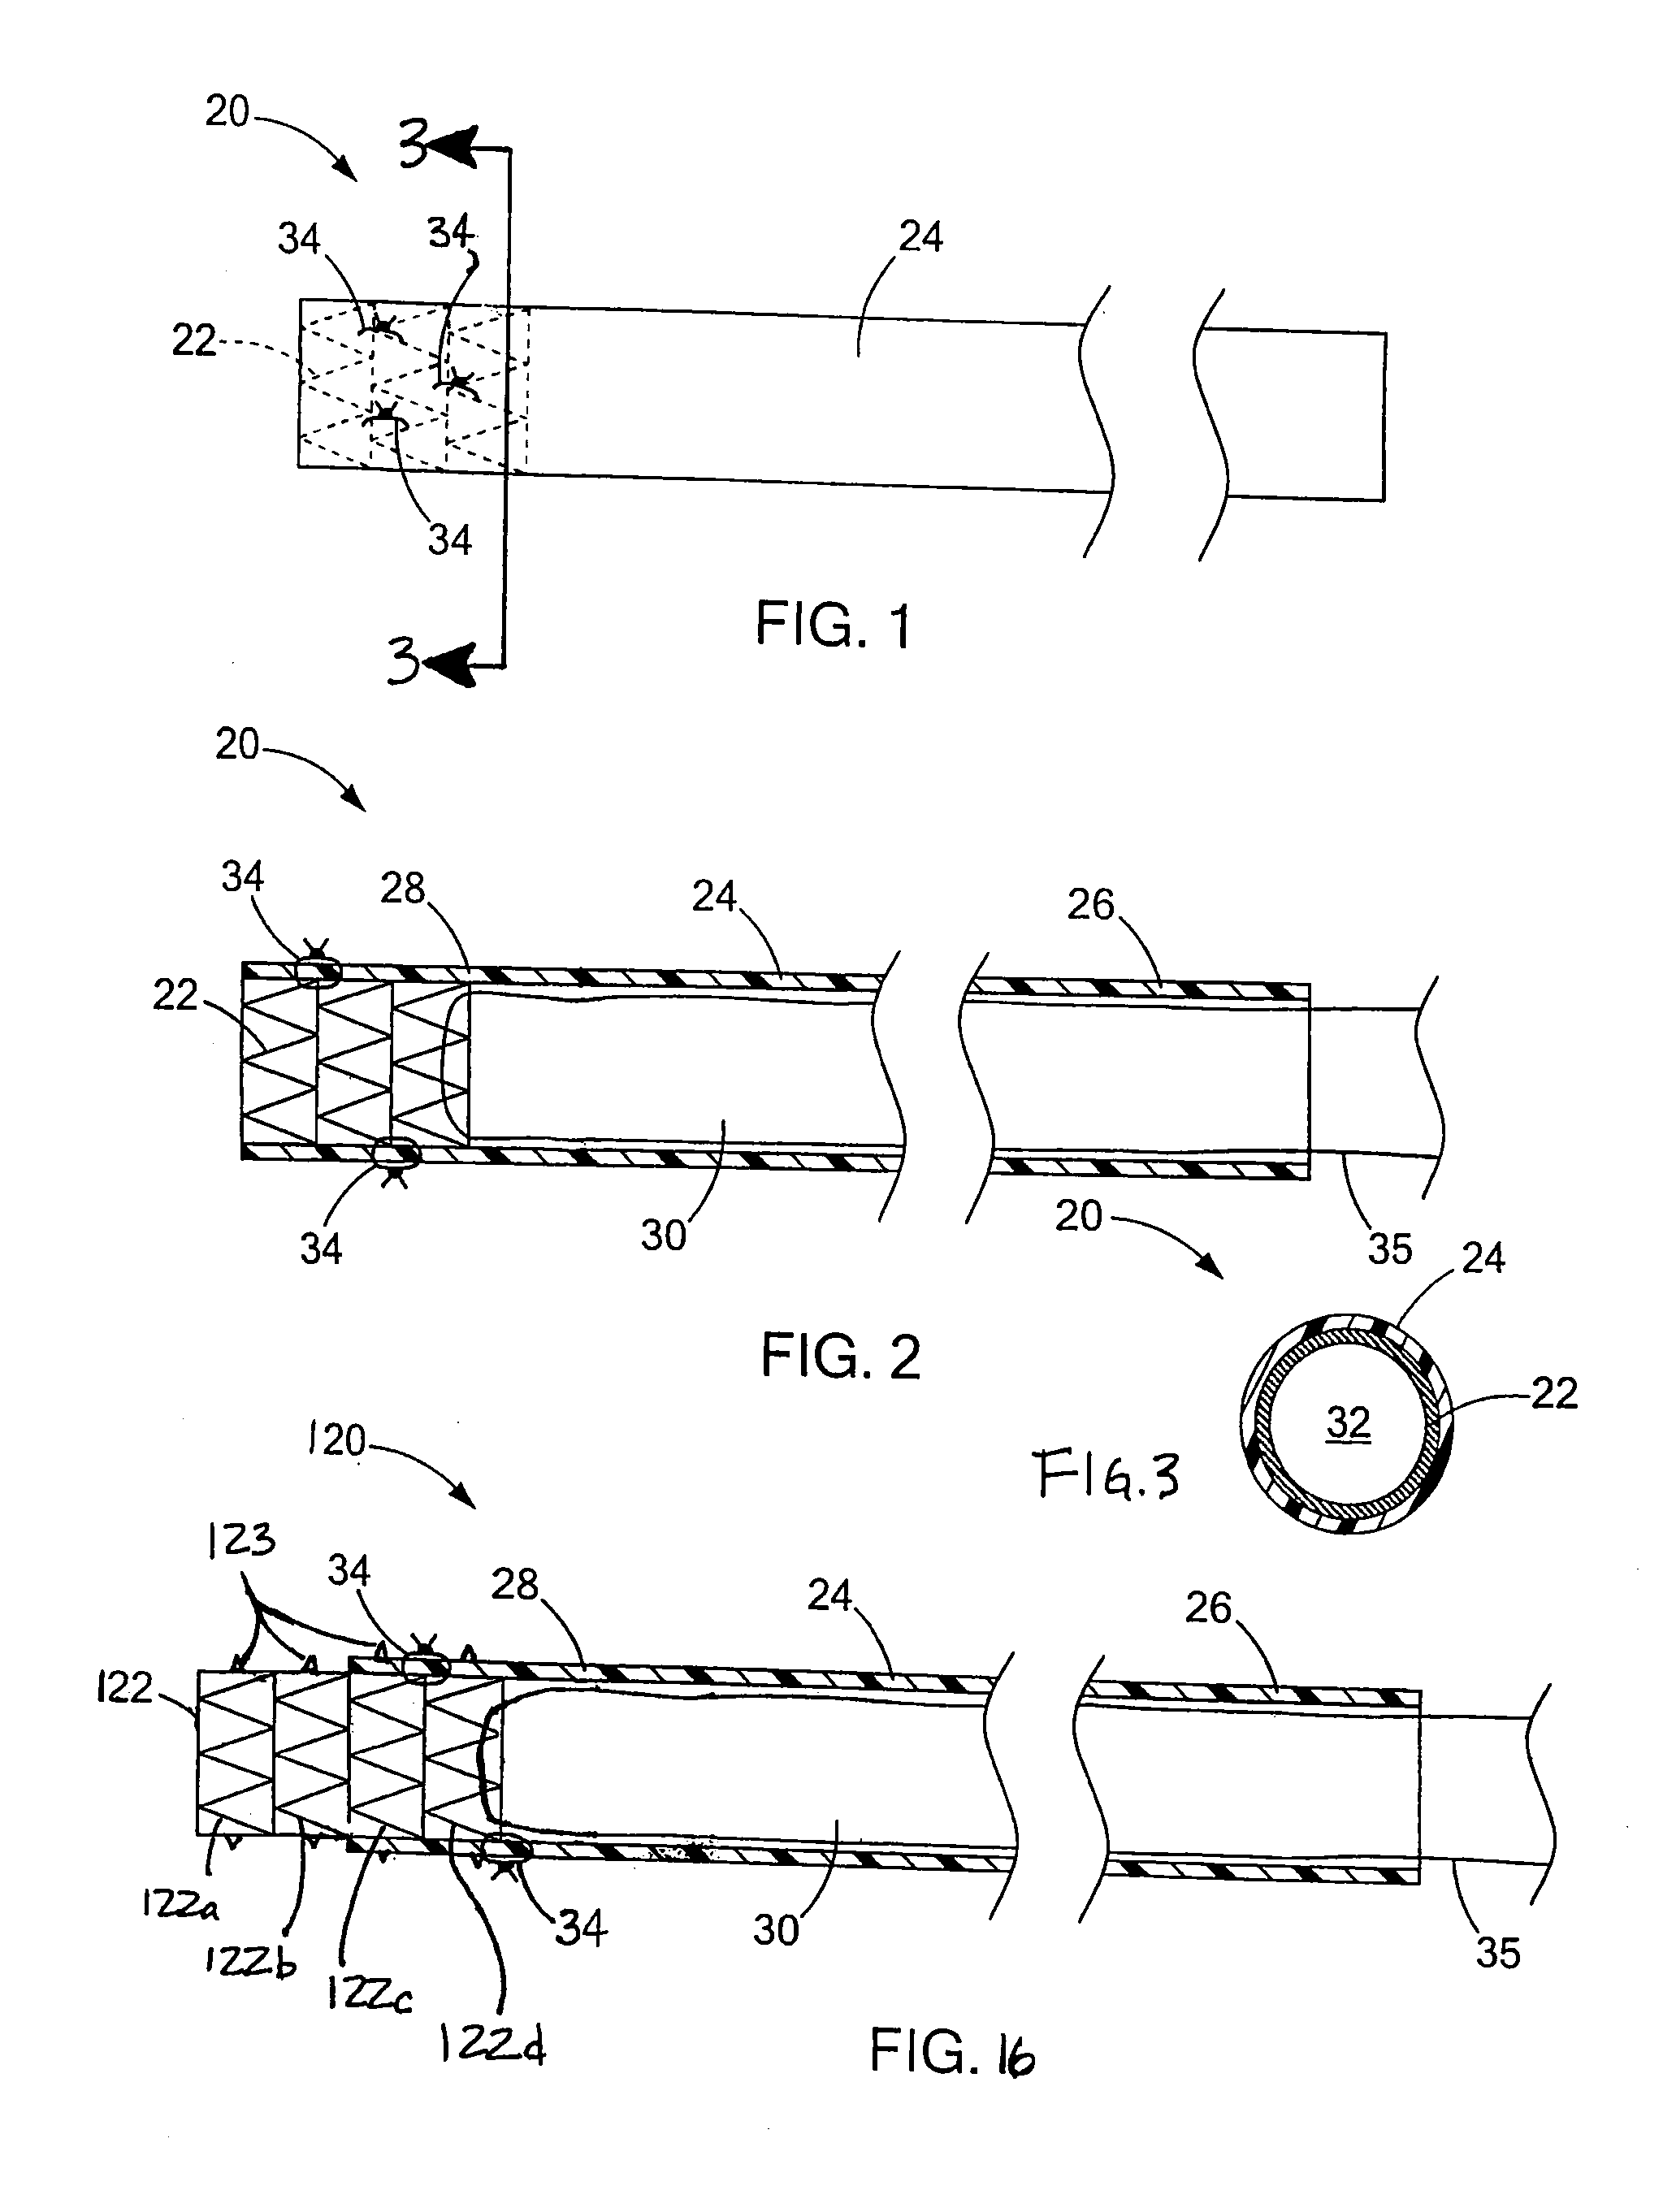 Systems, devices and methods for accessing a bodily opening